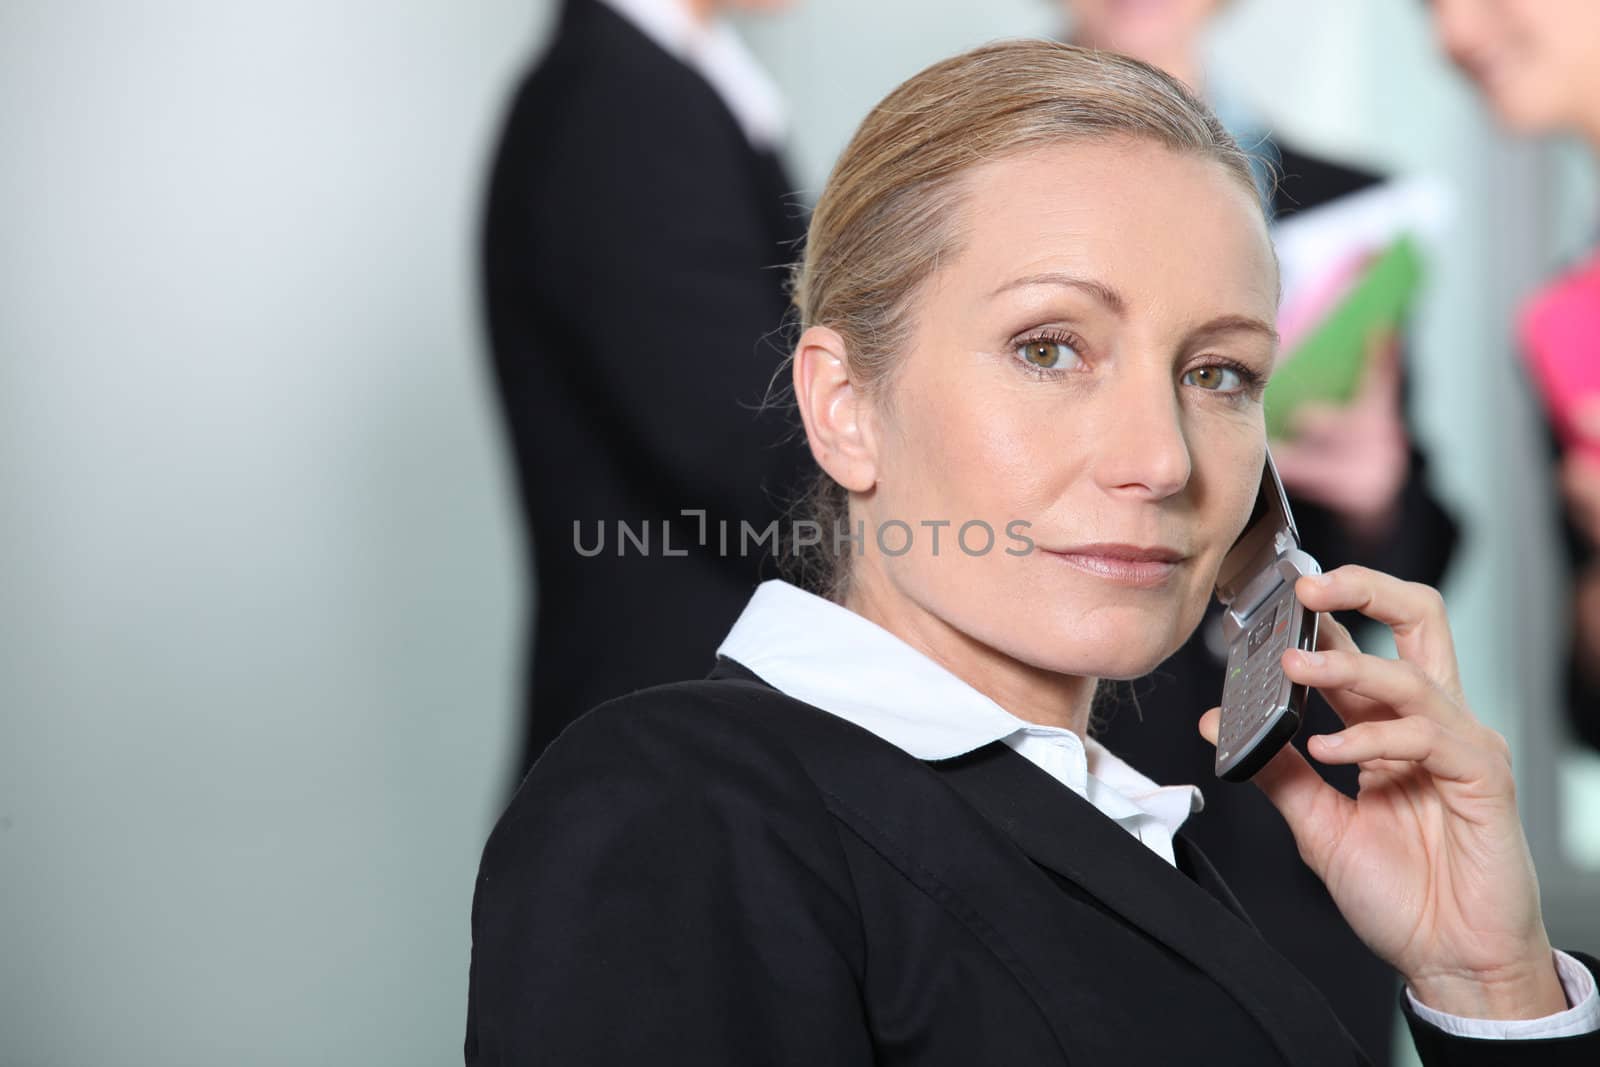 Businesswoman on the phone serious.